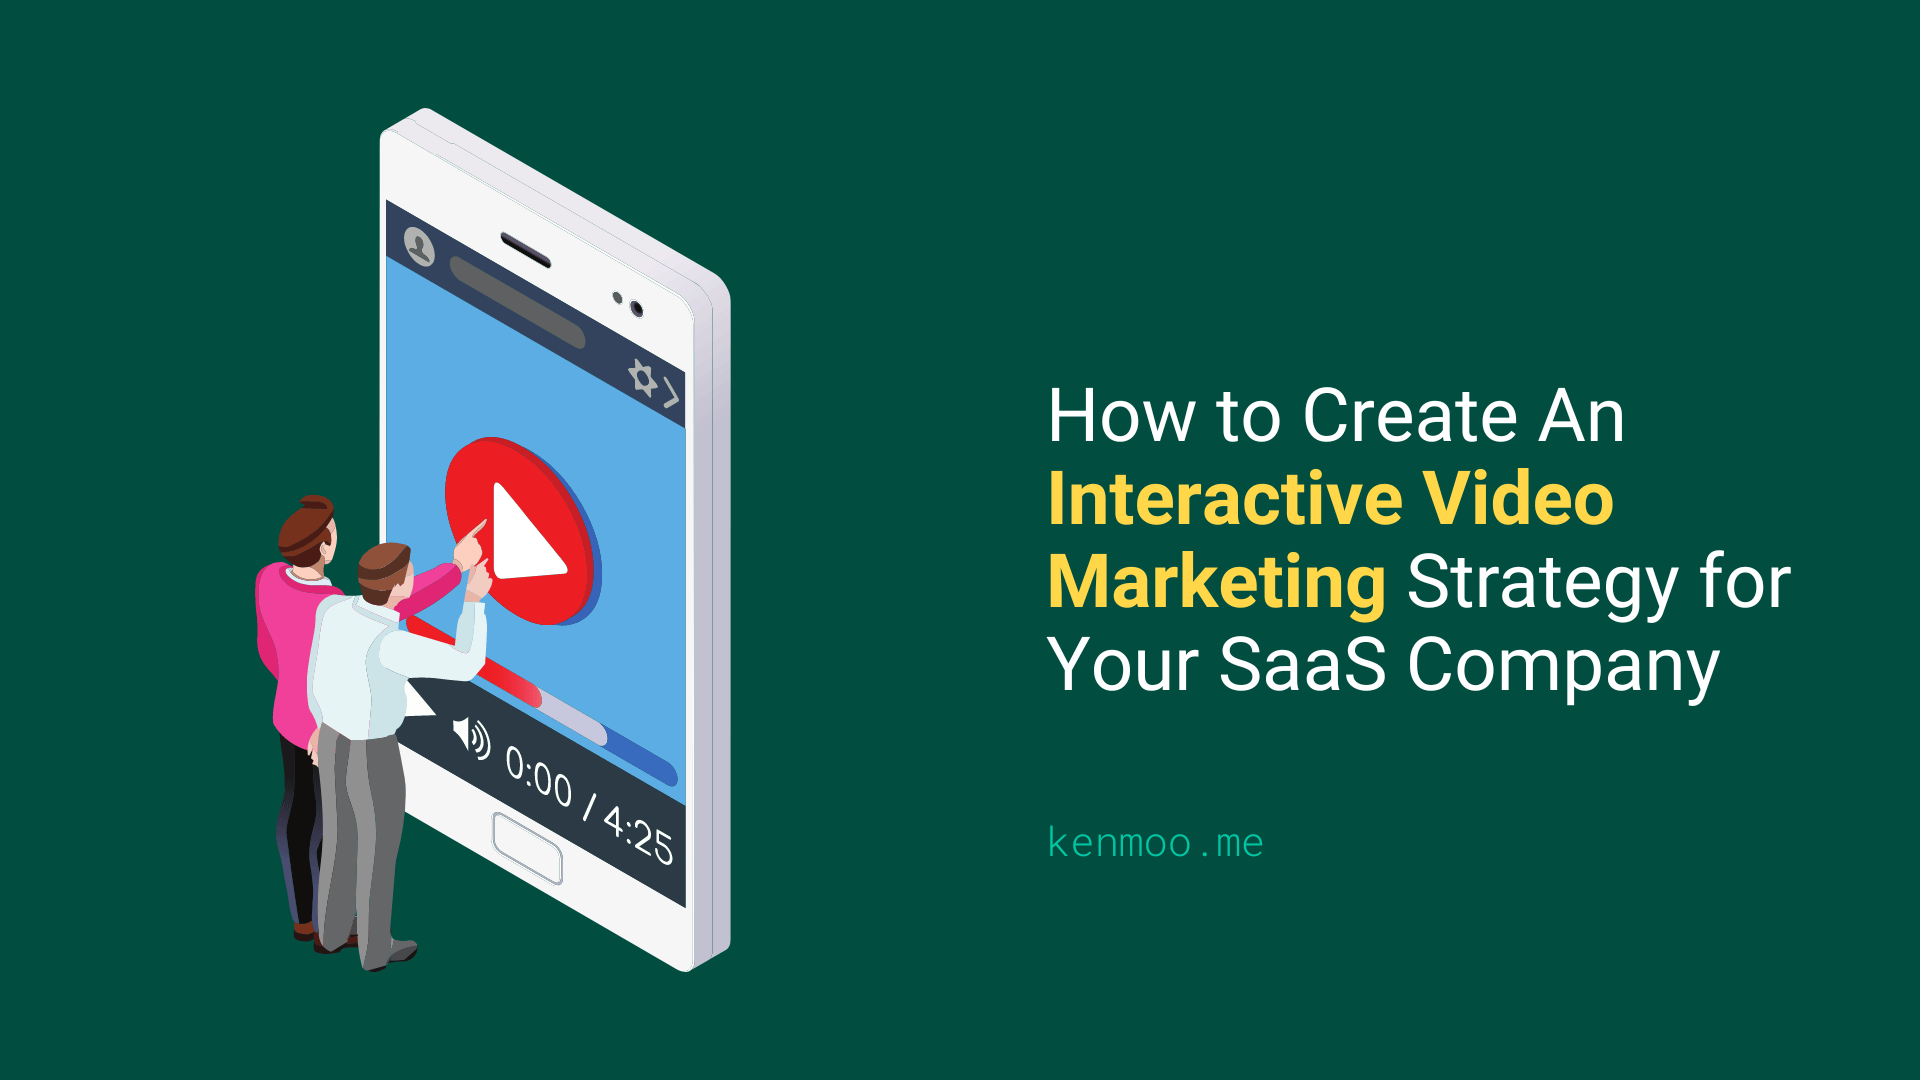 How to Create An Interactive Video Marketing Strategy for Your SaaS Company